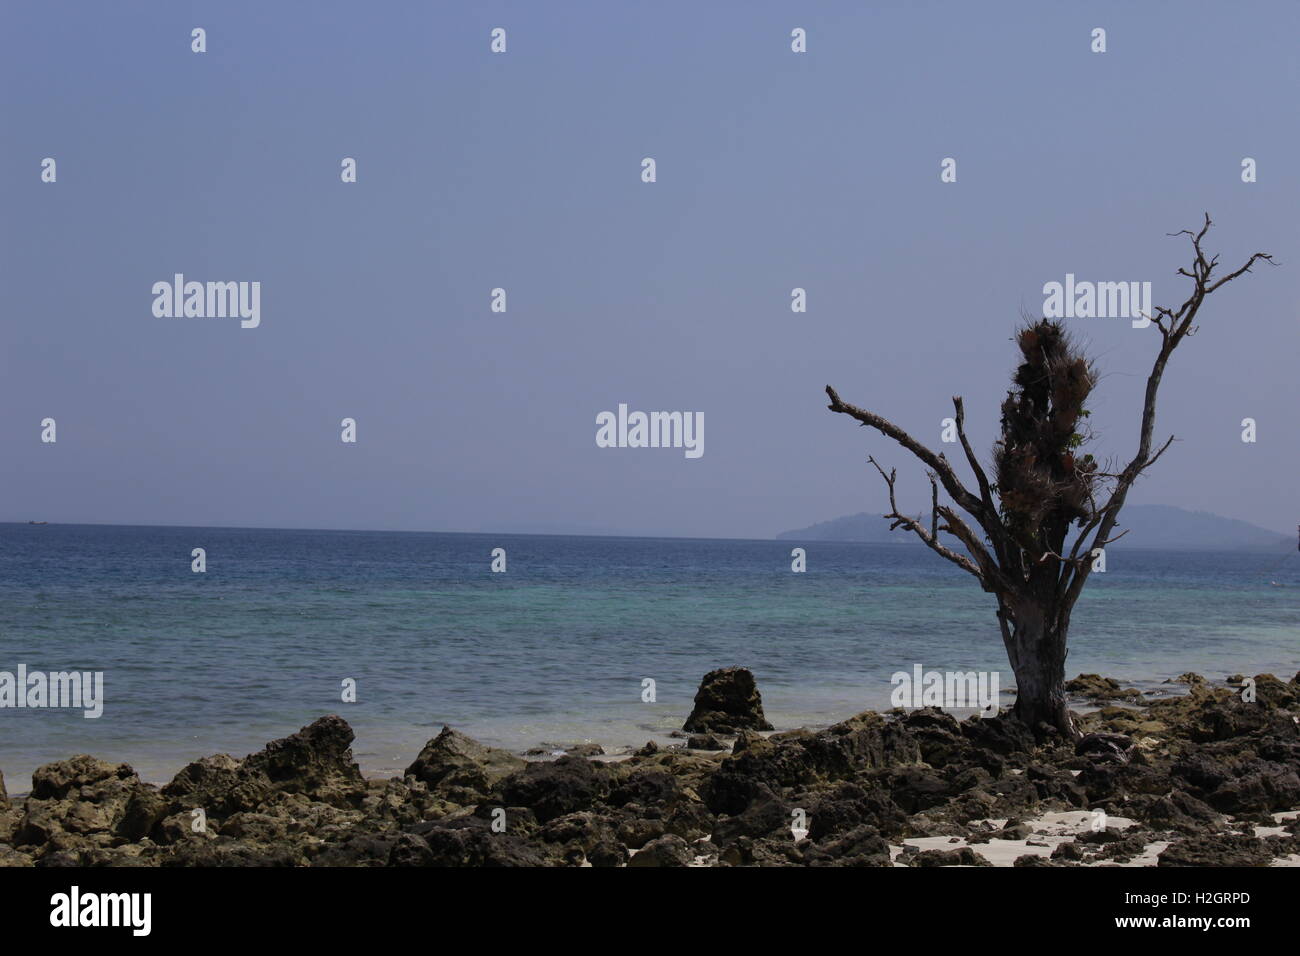 Remains of tree on the beach on Neil island after tsunami Stock Photo